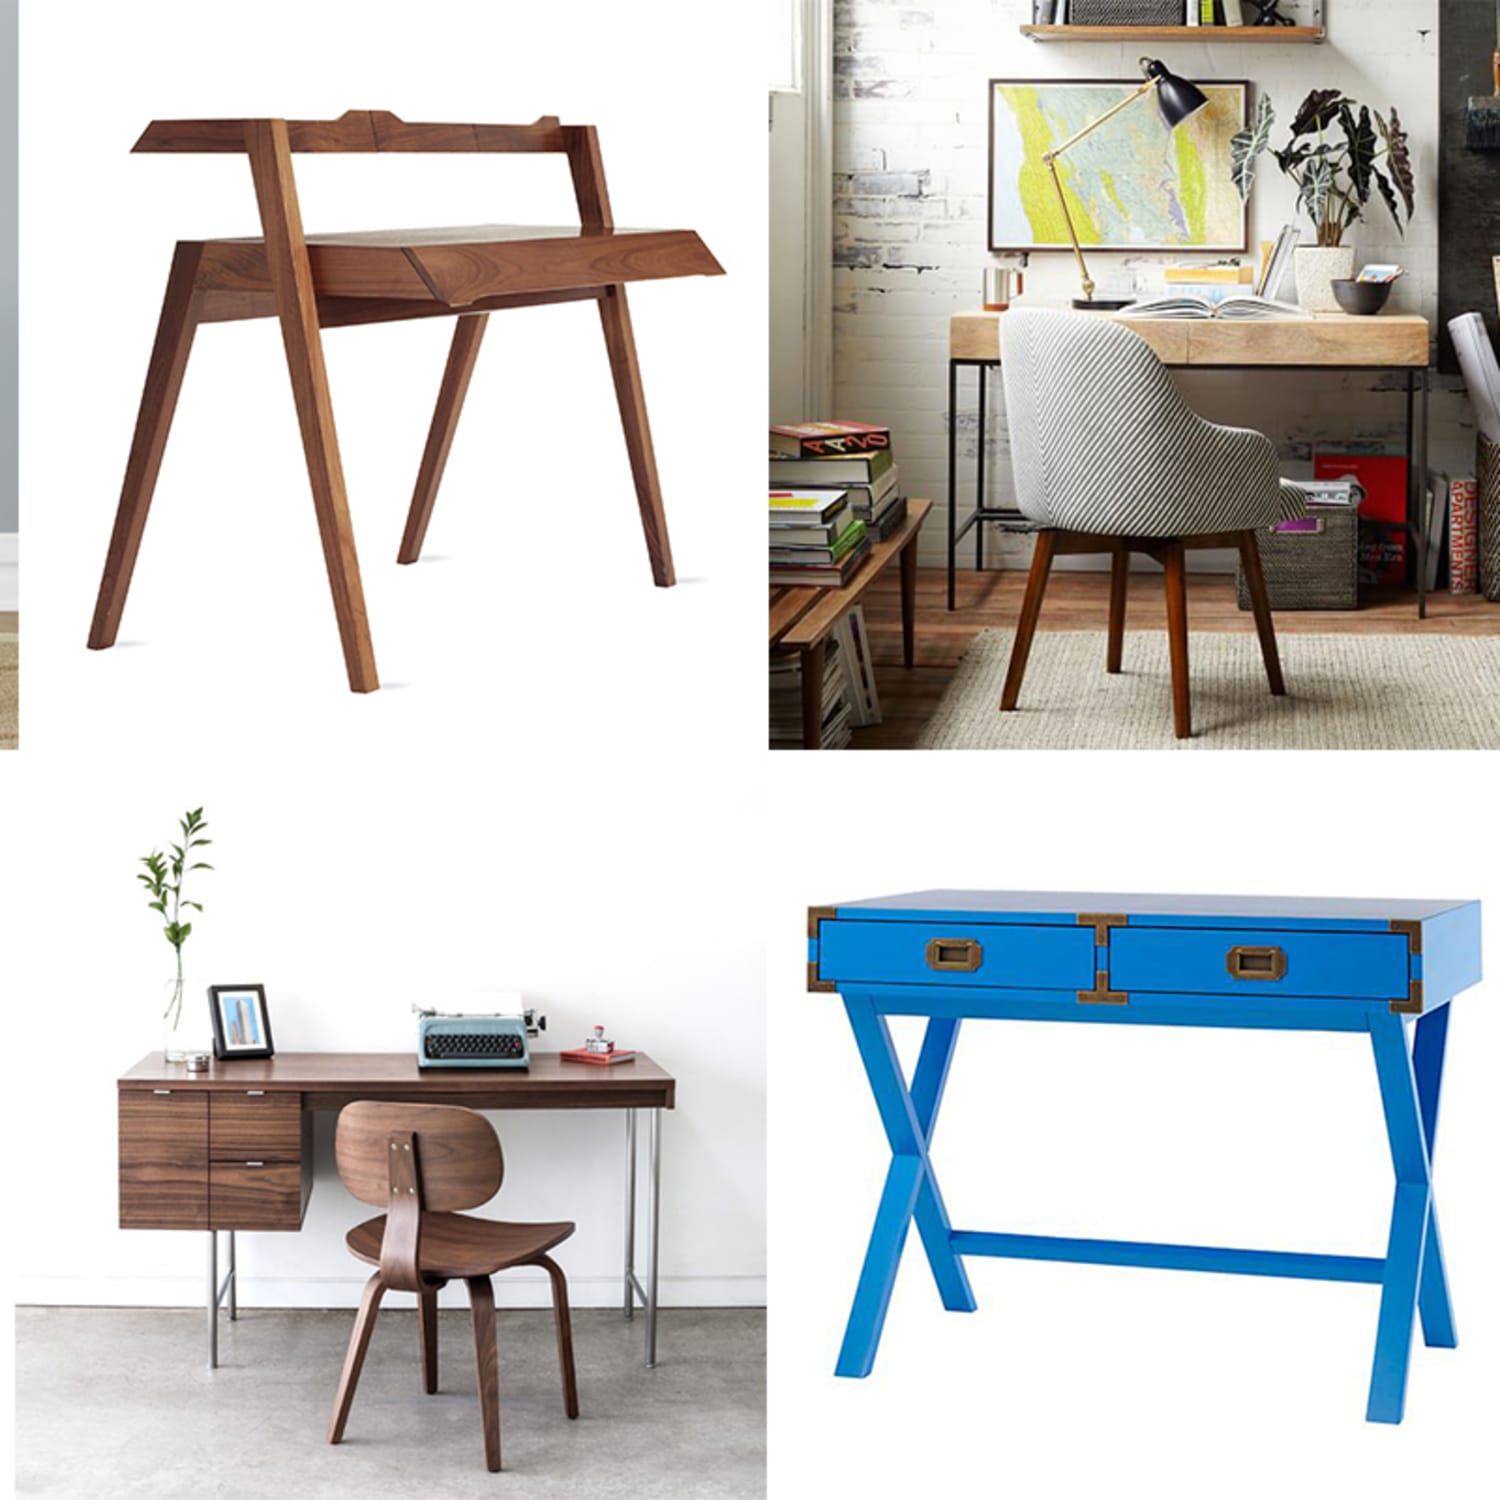 15 Low Profile Desks For Small Spaces Apartment Therapy